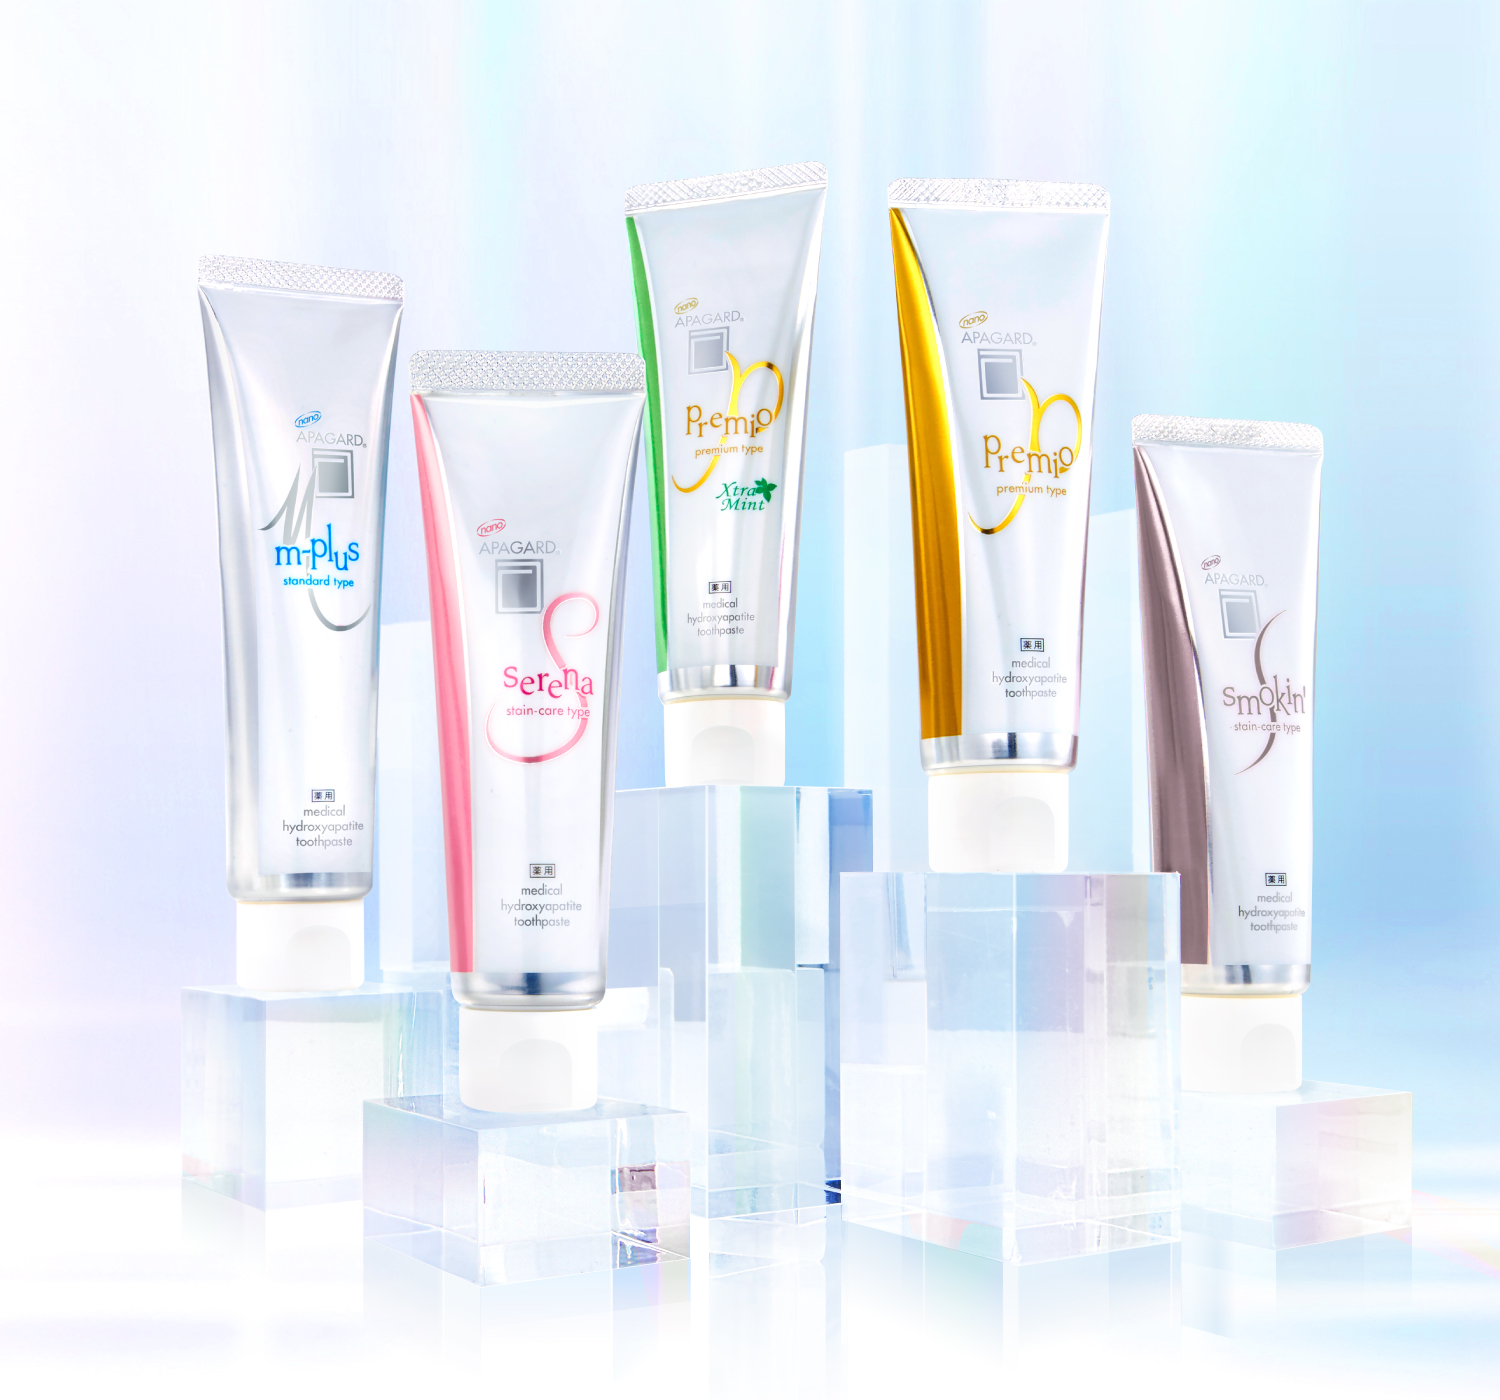 A selection of toothpastes on clear stands